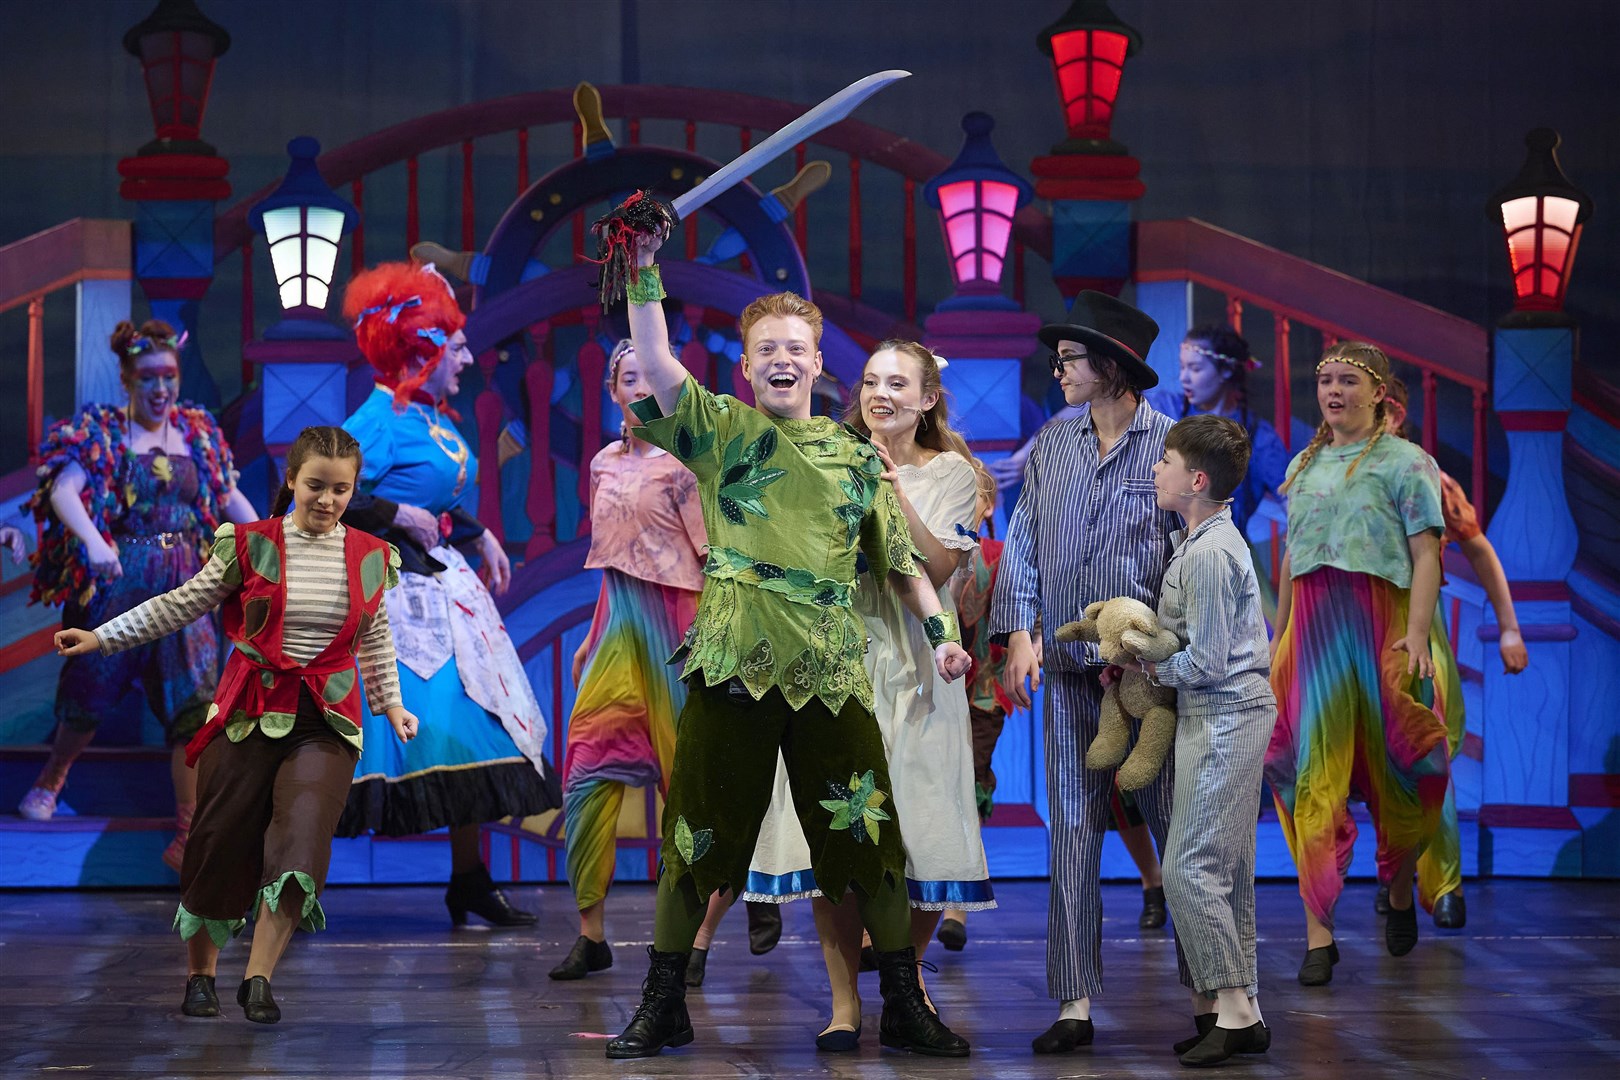 Peter Pan – the boy who never grew up – leads the fun. Picture: Ewen Weatherspoon